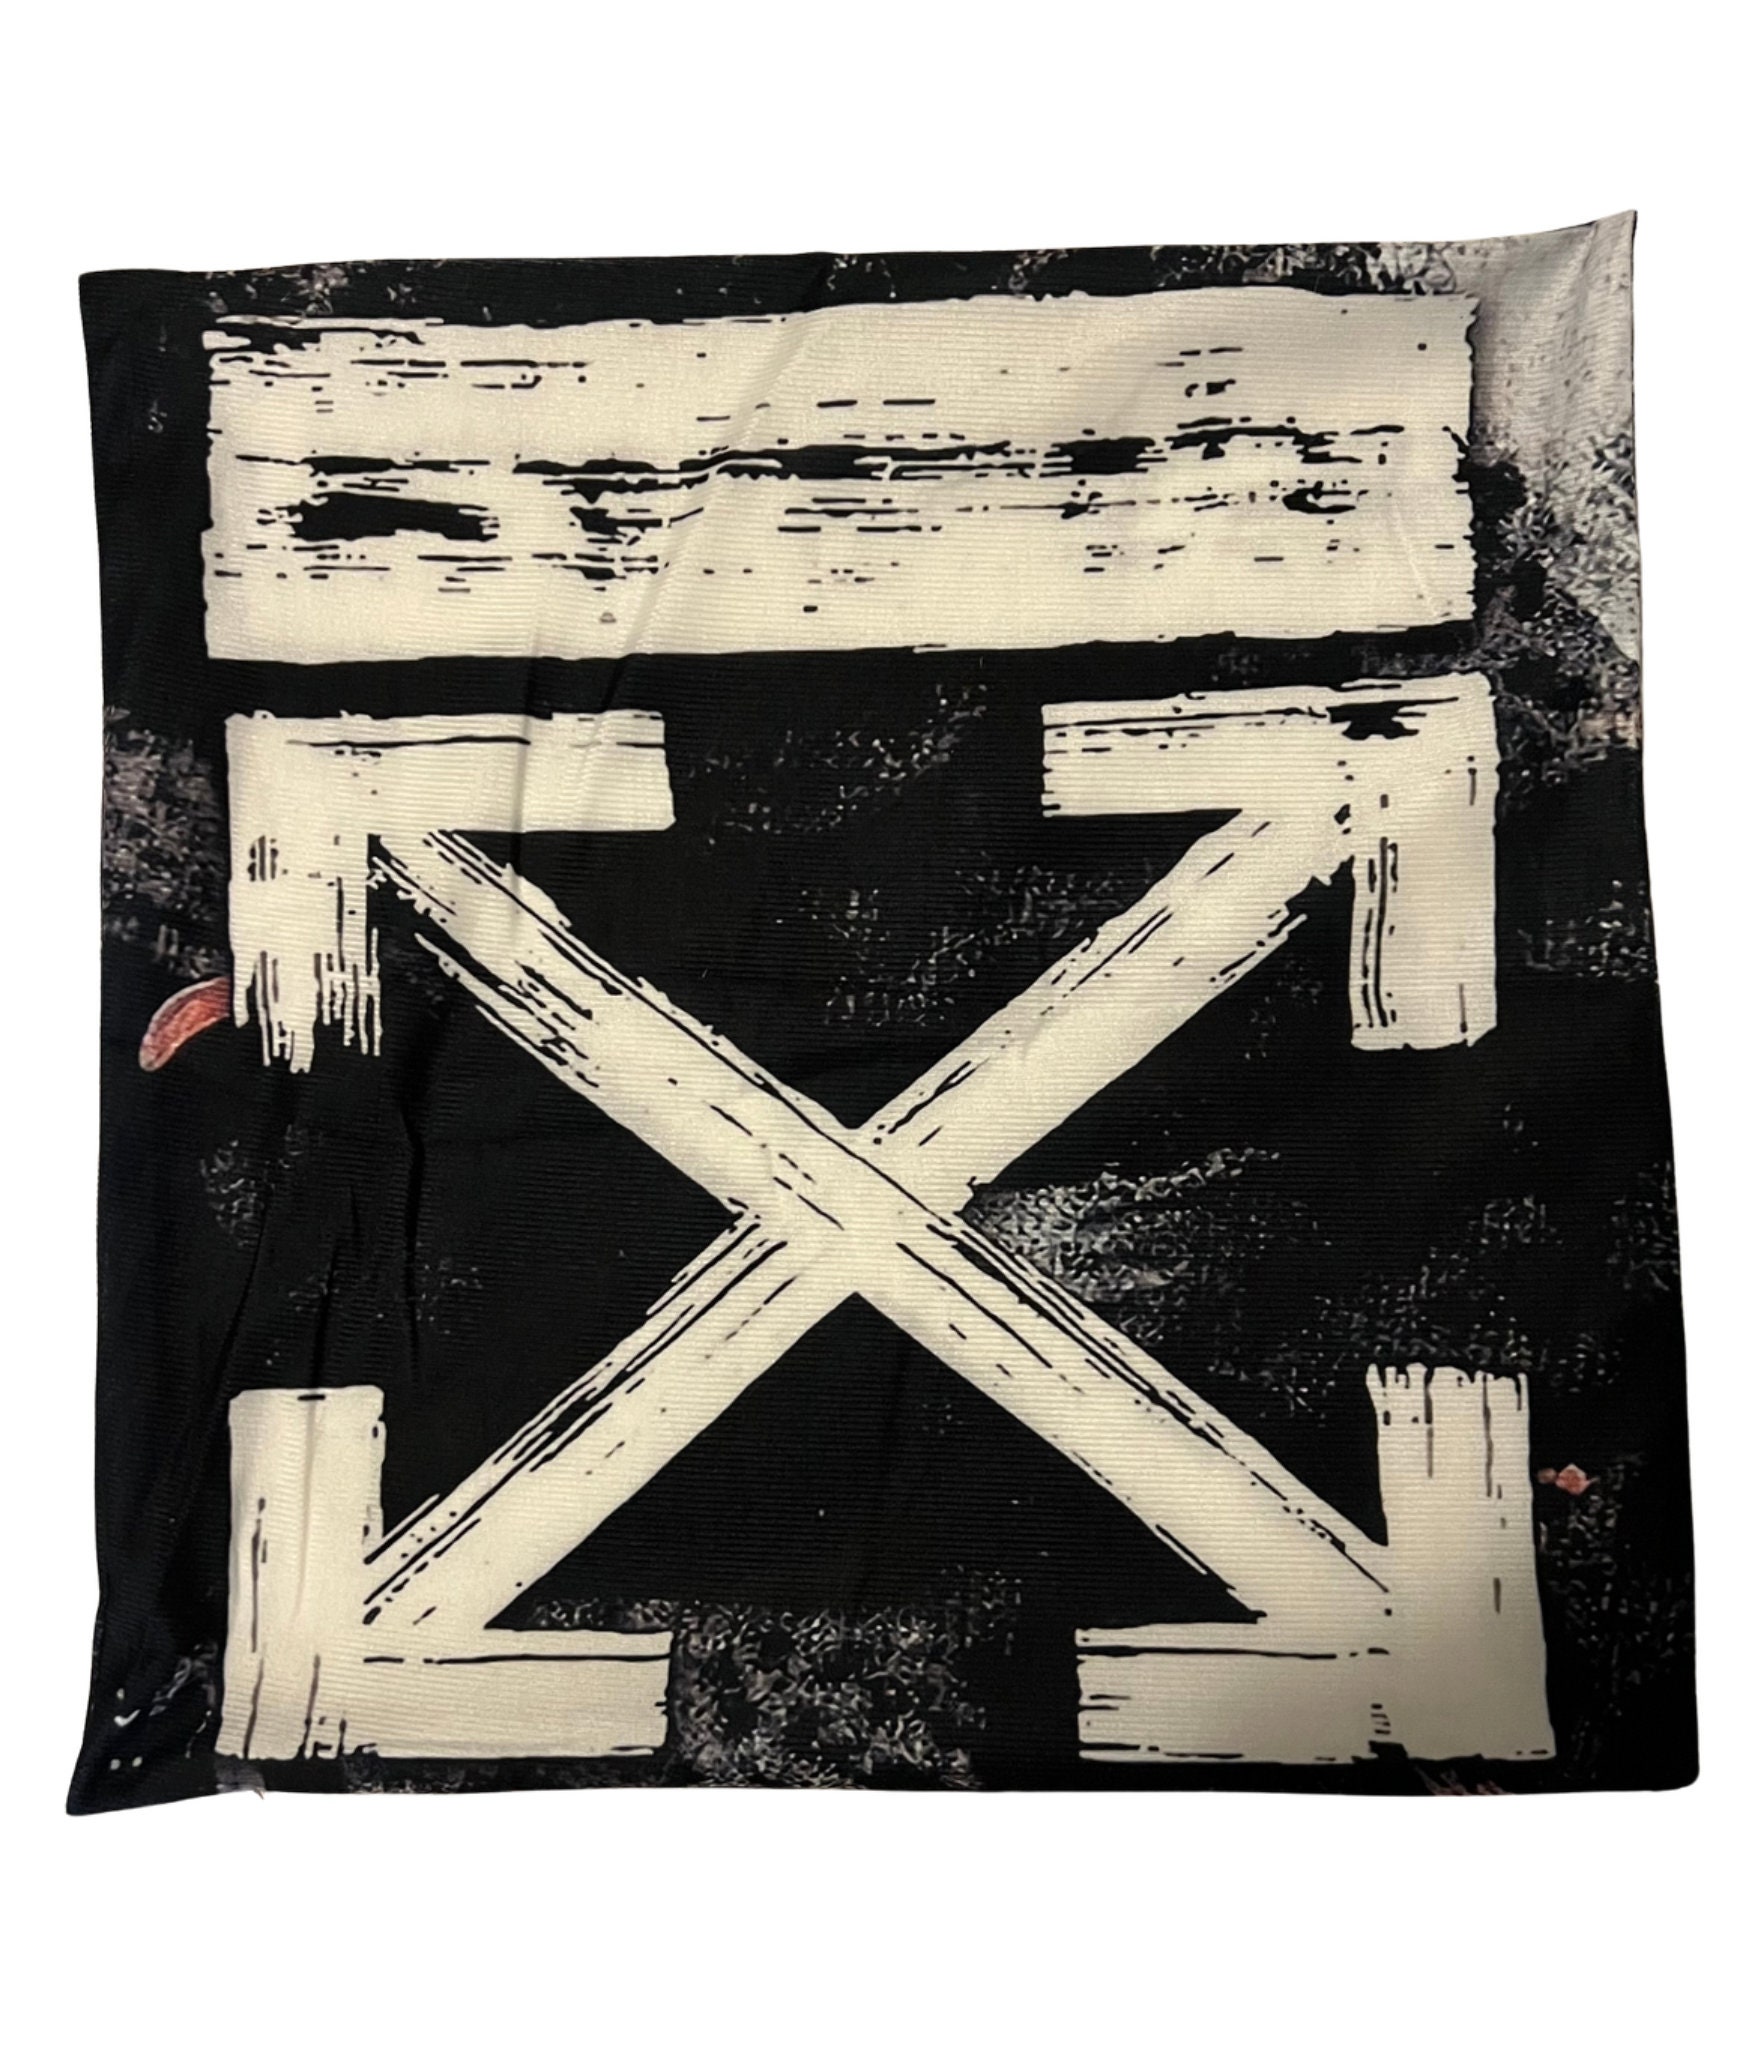  Luxape Pillowcase - 18in - Hypebeast Room Decor - Off White  Room Pillow Cover - Hype Beats Pillows - Black and White Pillows - Bape  Decorations - Hypebeast Pillow : Home & Kitchen